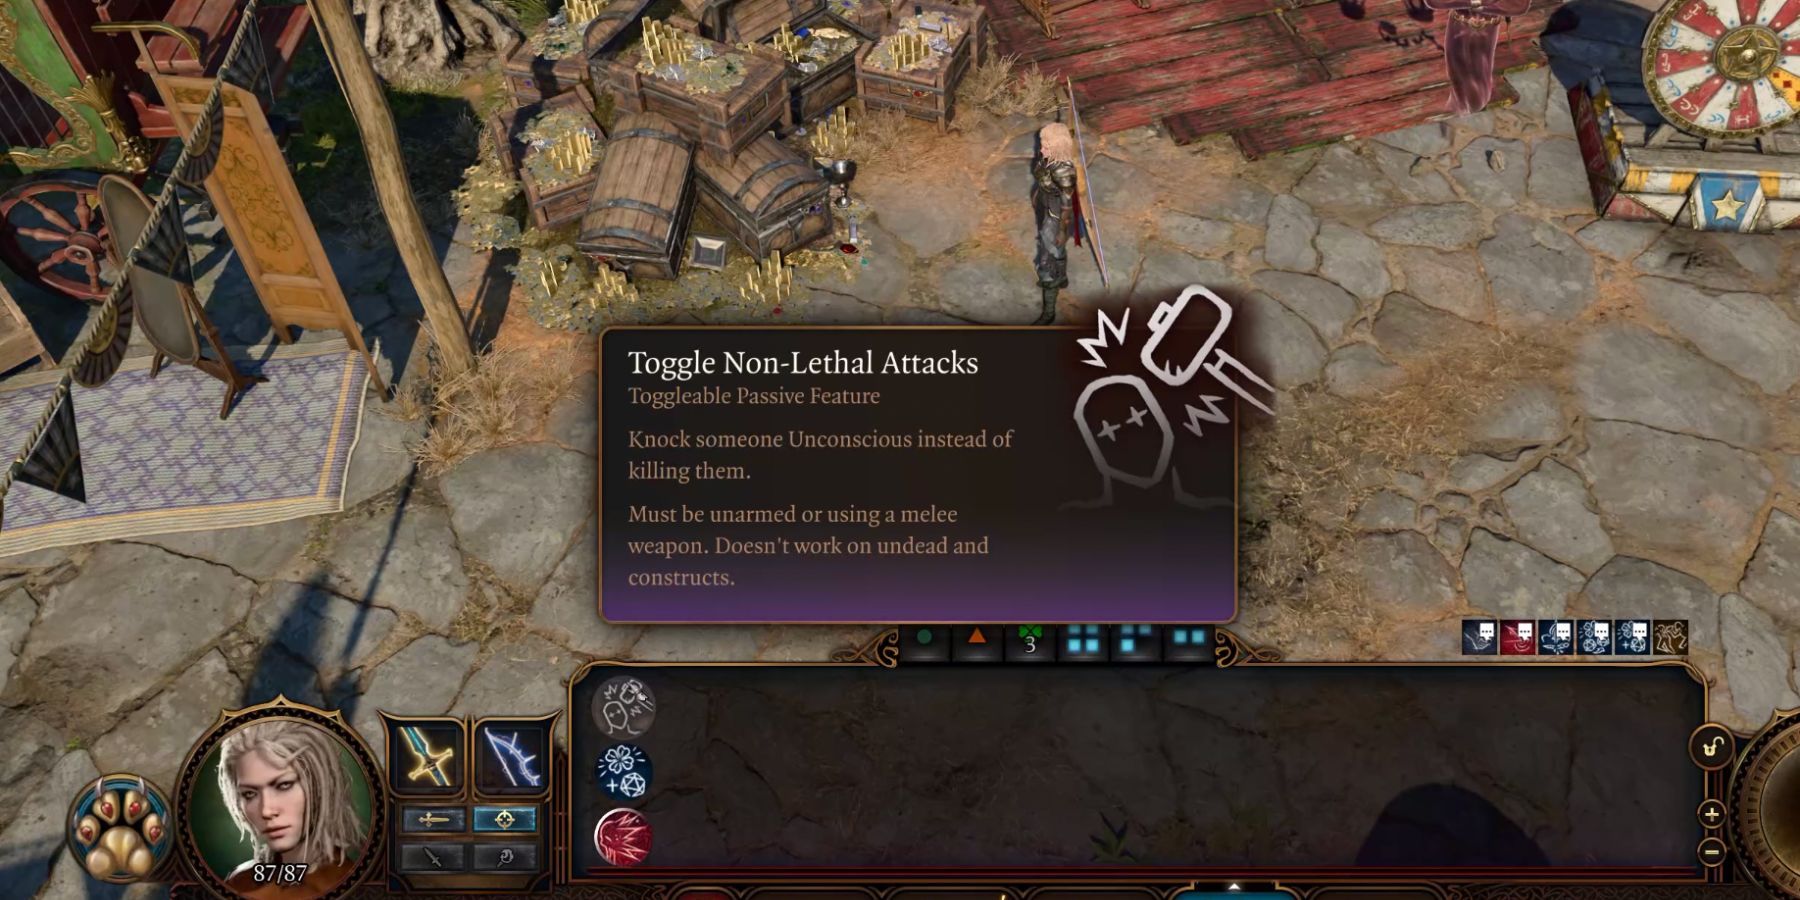 How to Deal Non-Lethal Damage In Baldur’s Gate 3